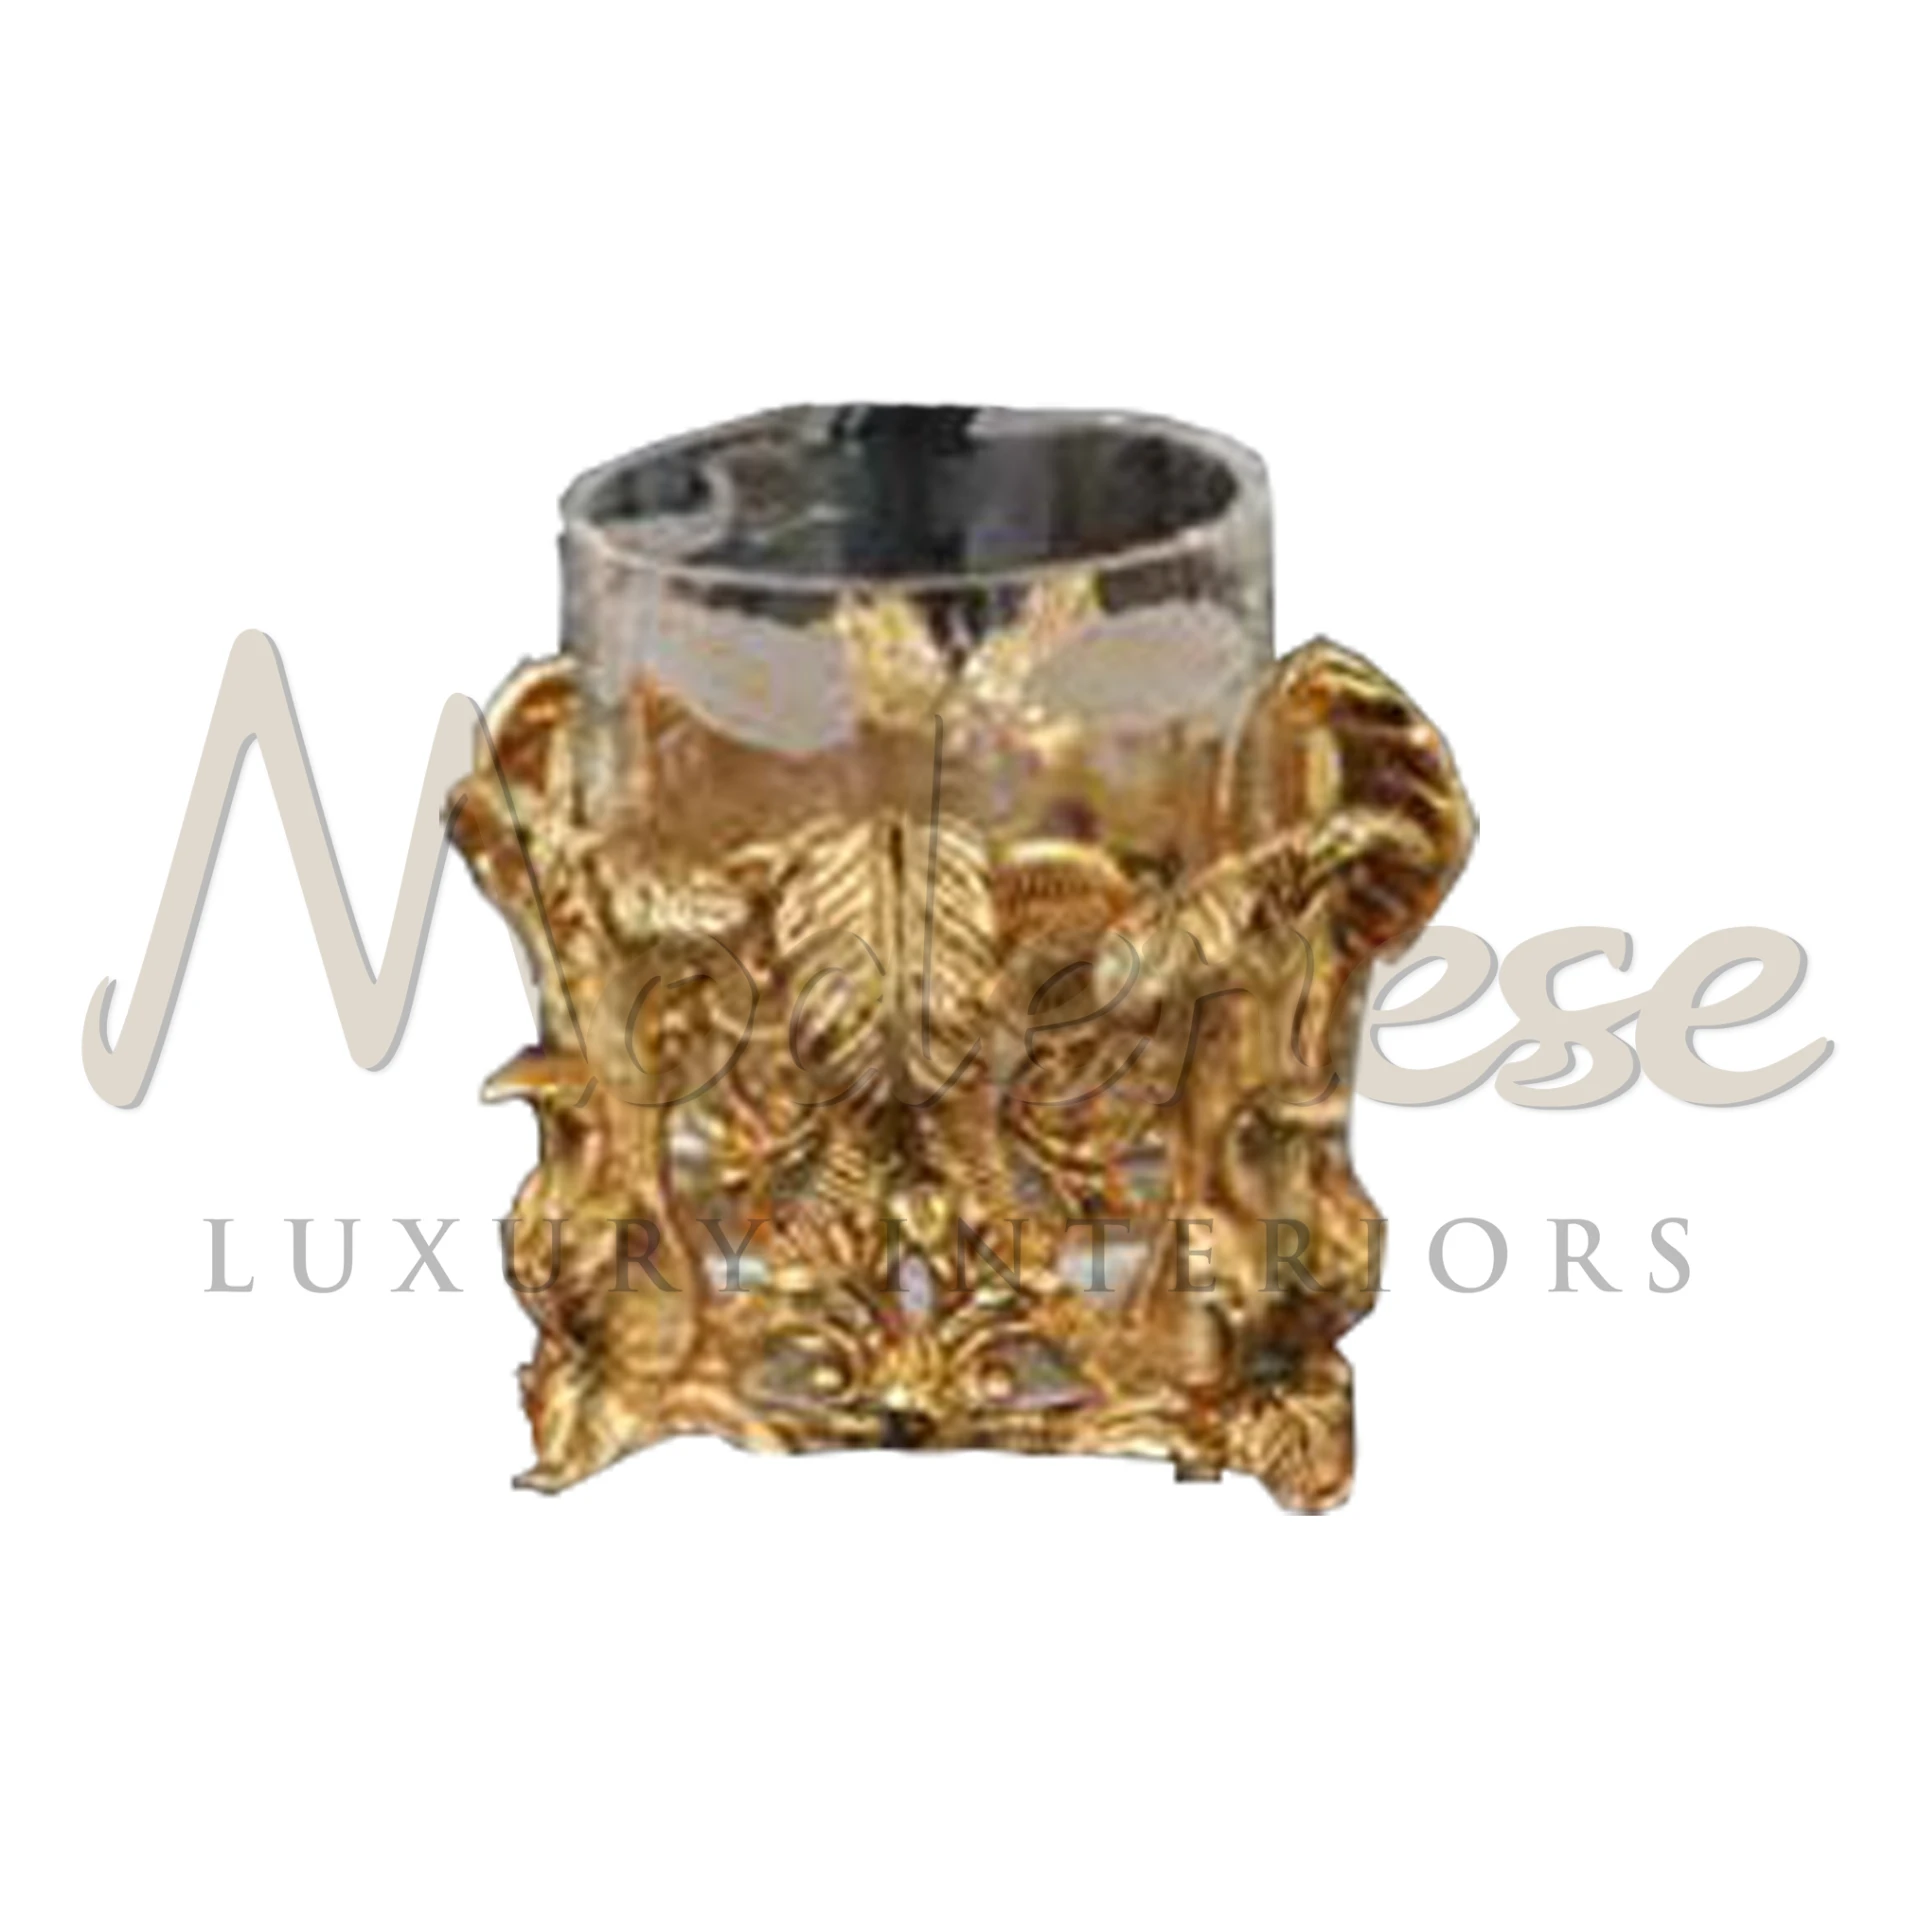 Classical Gold Toothbrush Holder in brass or stainless steel, adding a luxurious and elegant touch to bathroom interiors with its sophisticated design.






